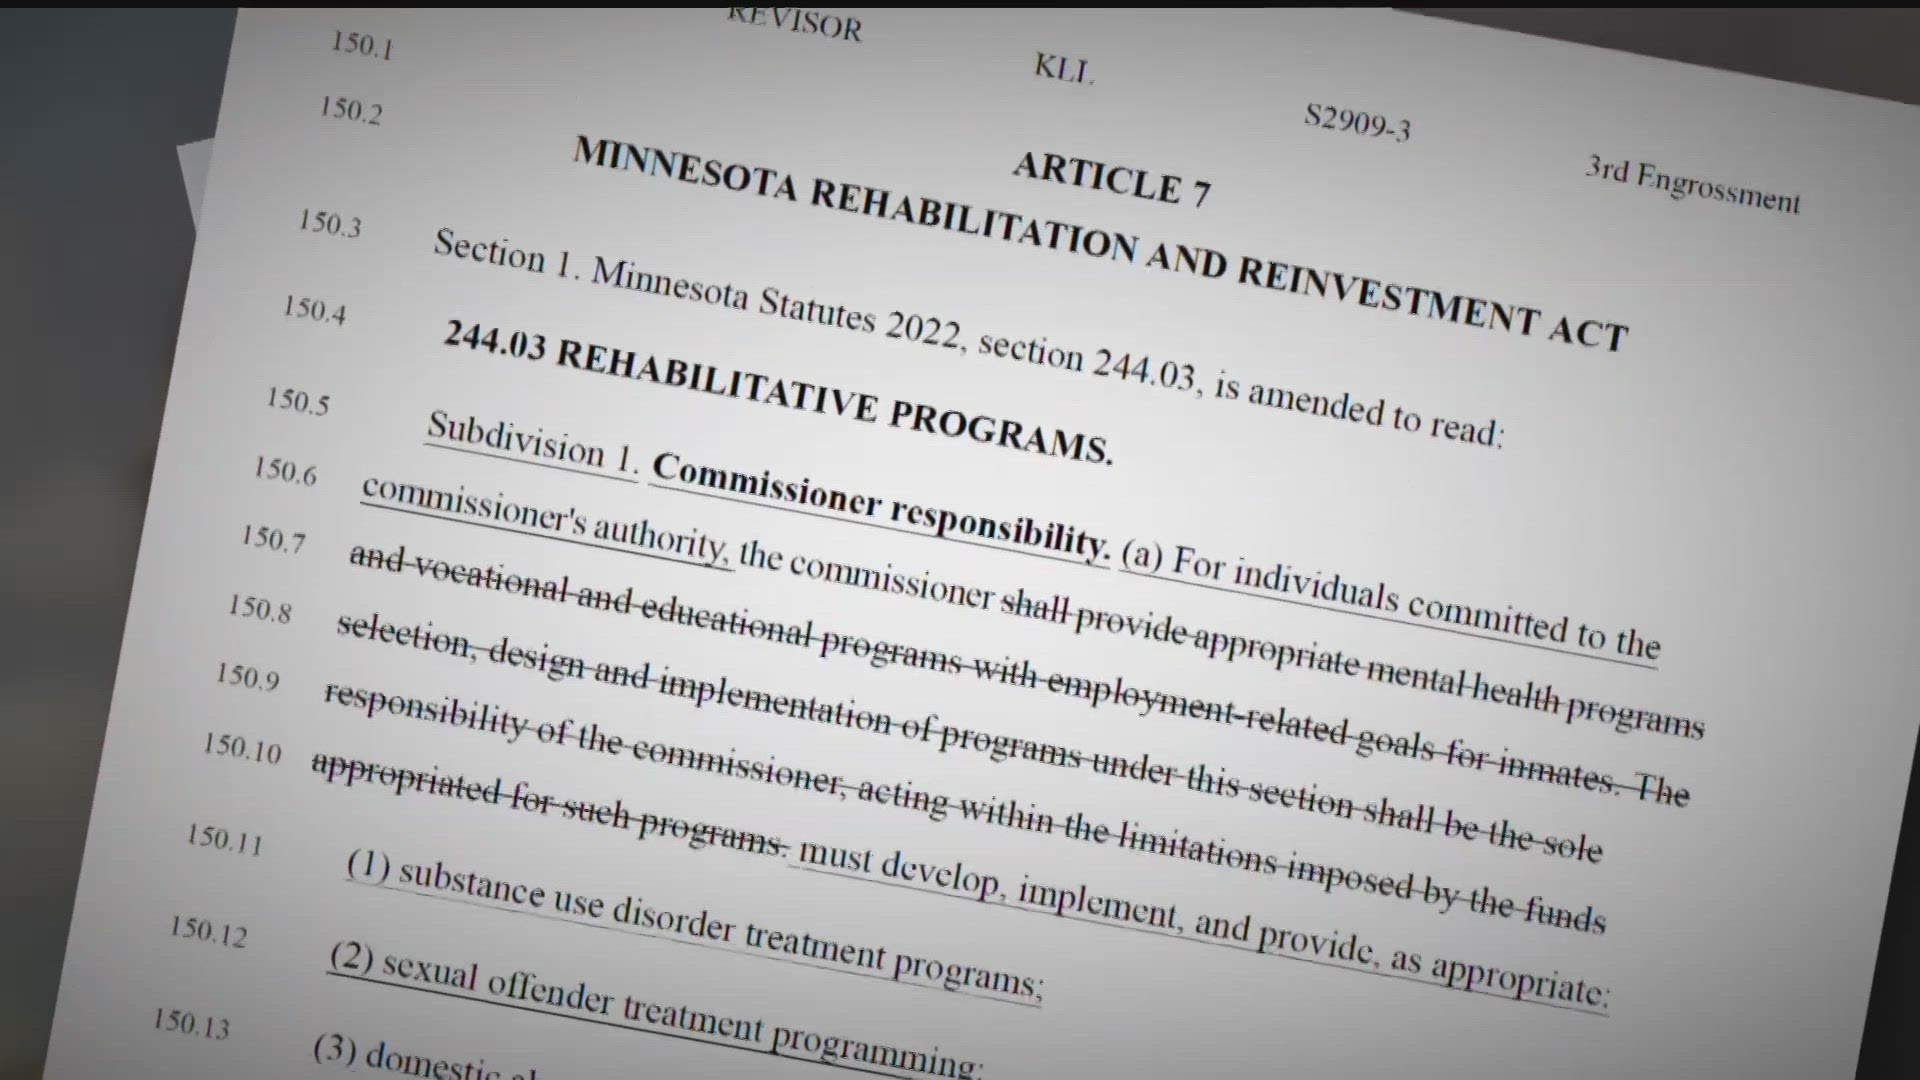 The Minnesota Rehabilitation and Reinvestment Act would allow convicted felons the option of an earned early release through a rehabilitation program.